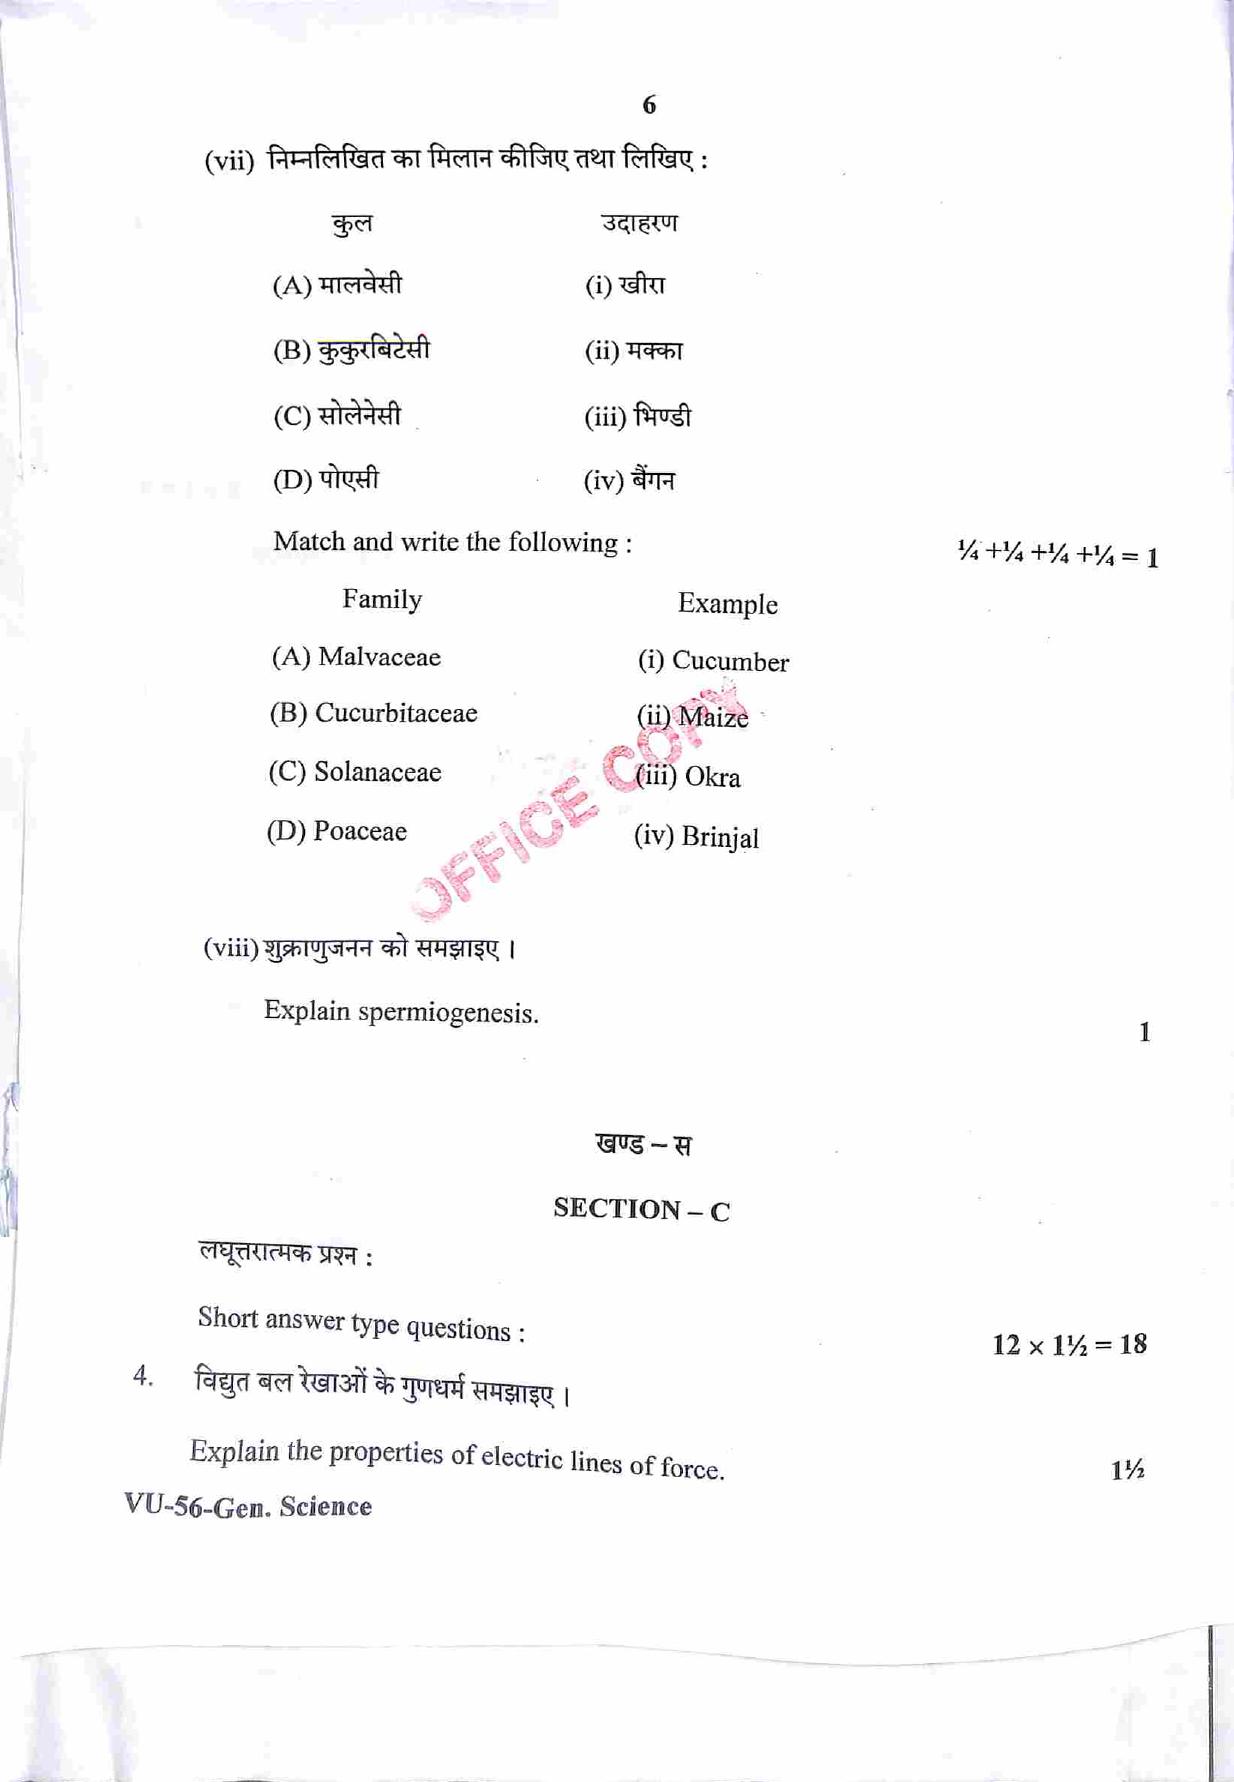 RBSE 2022 General Science Upadhyay Question Paper - Page 7